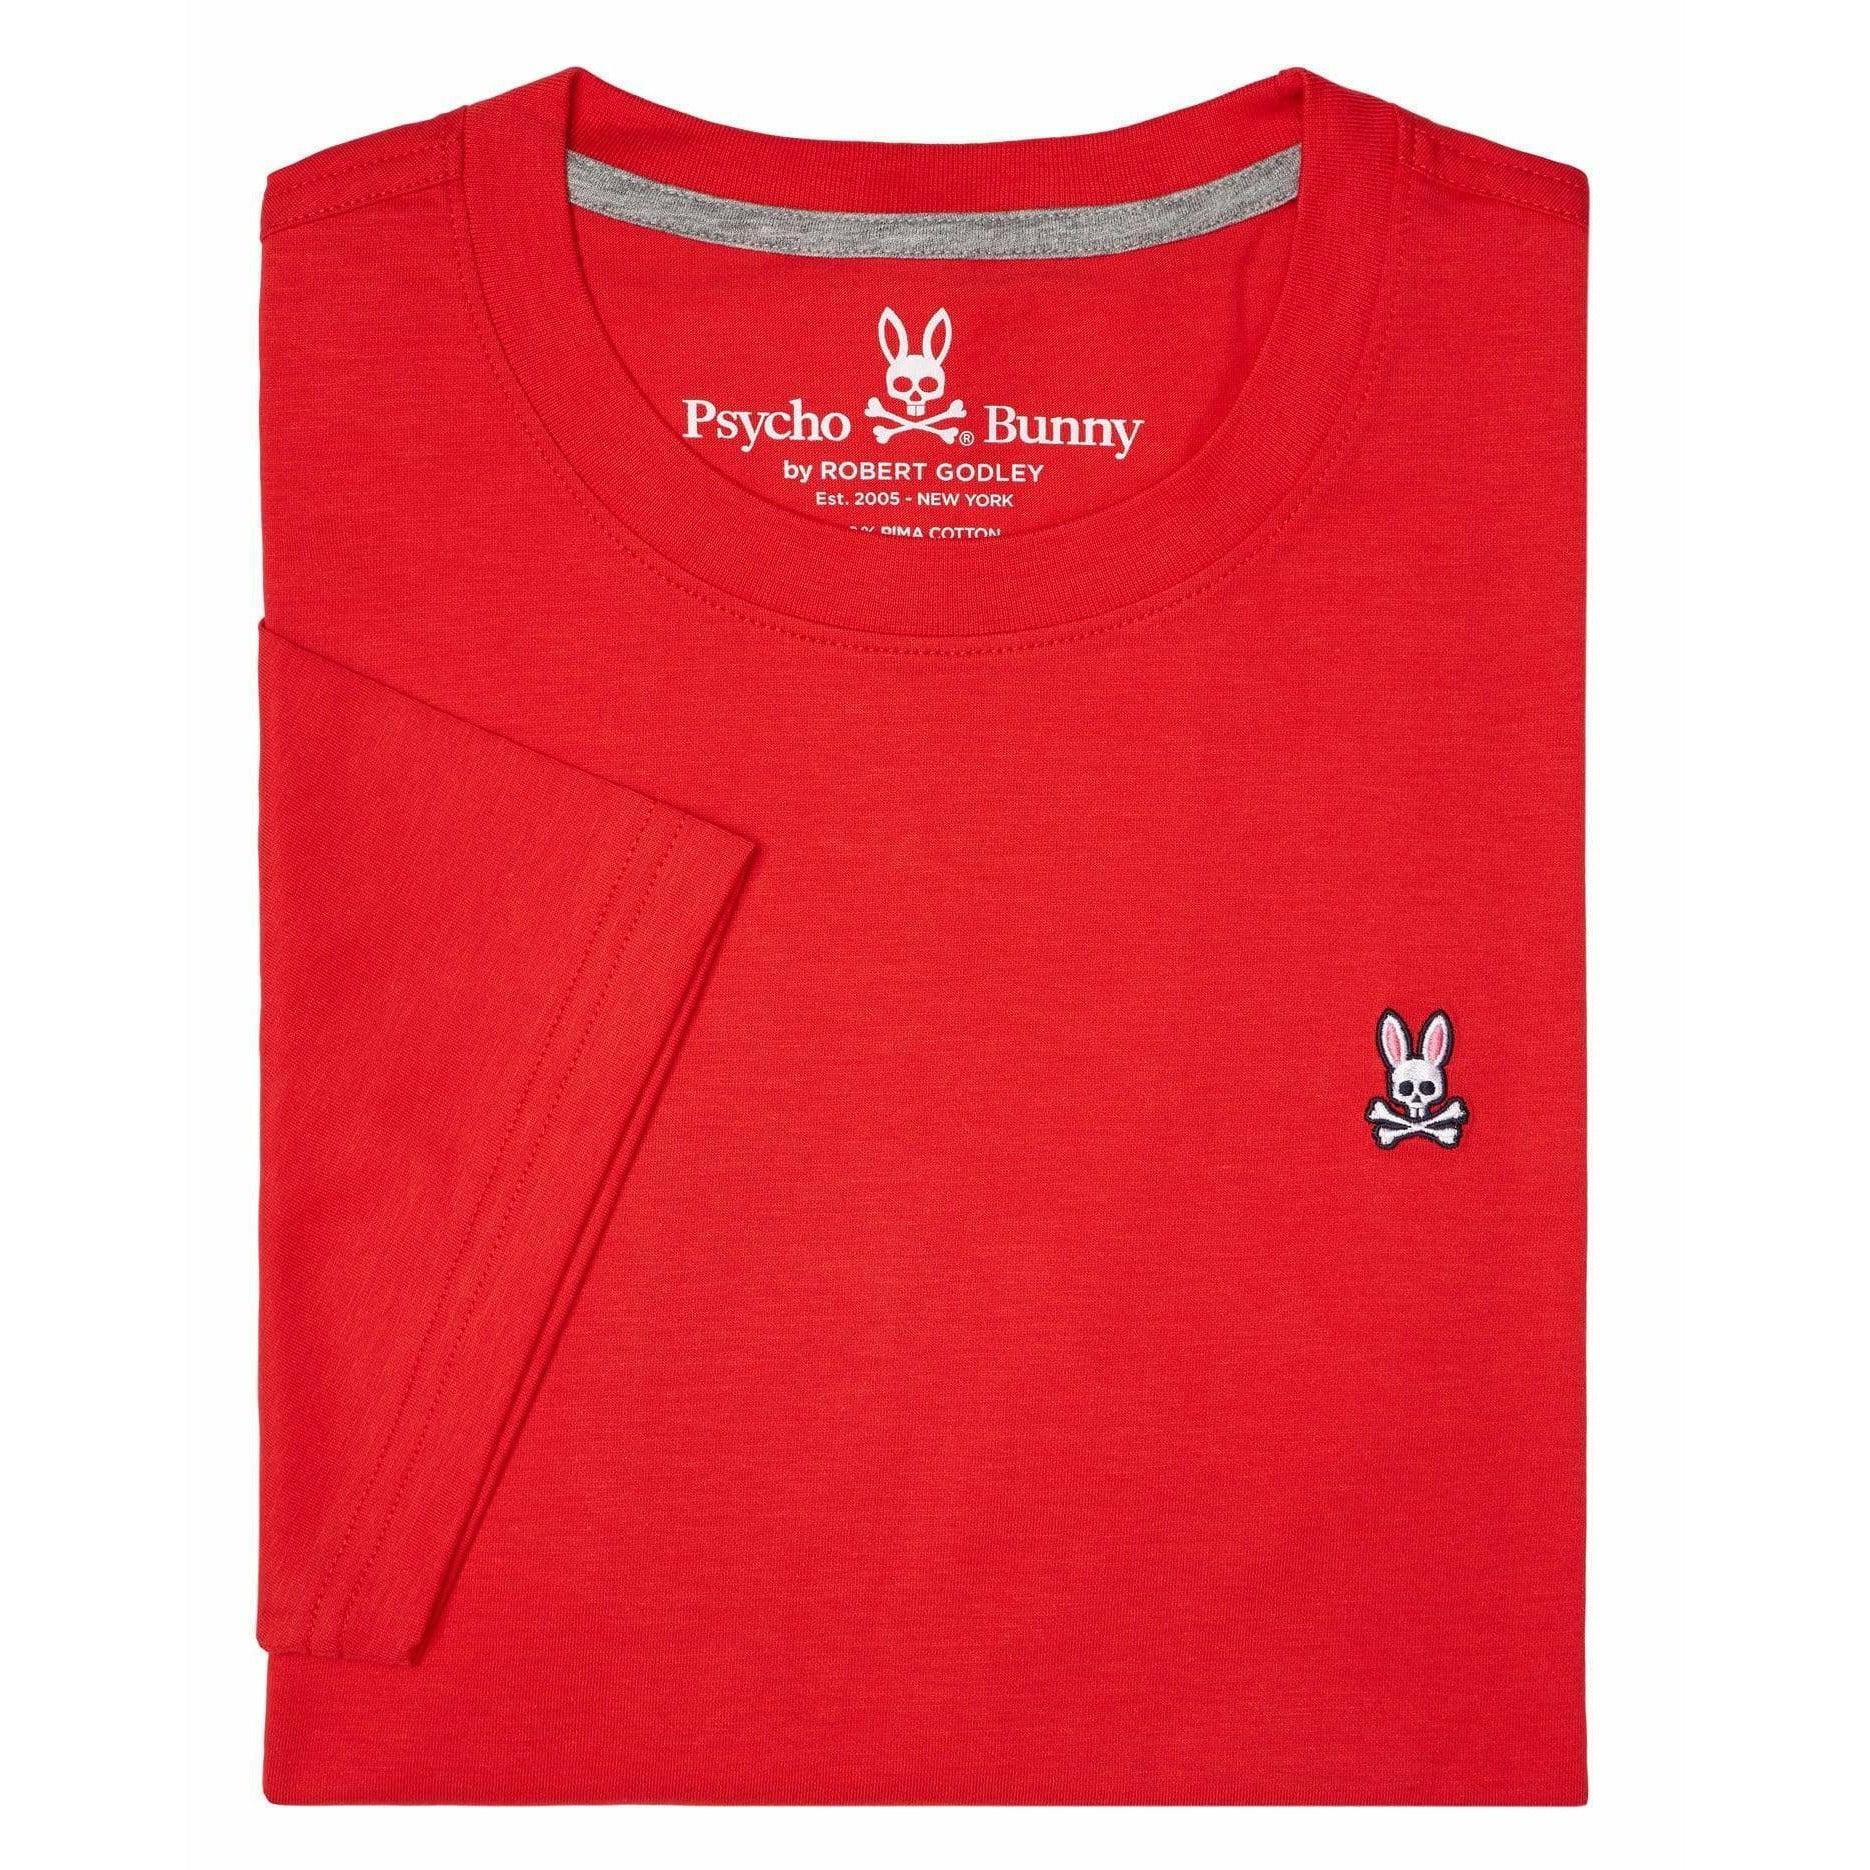 Psycho Bunny Brilliant Red / S Psycho Bunny Classic Crew Neck Core Collection